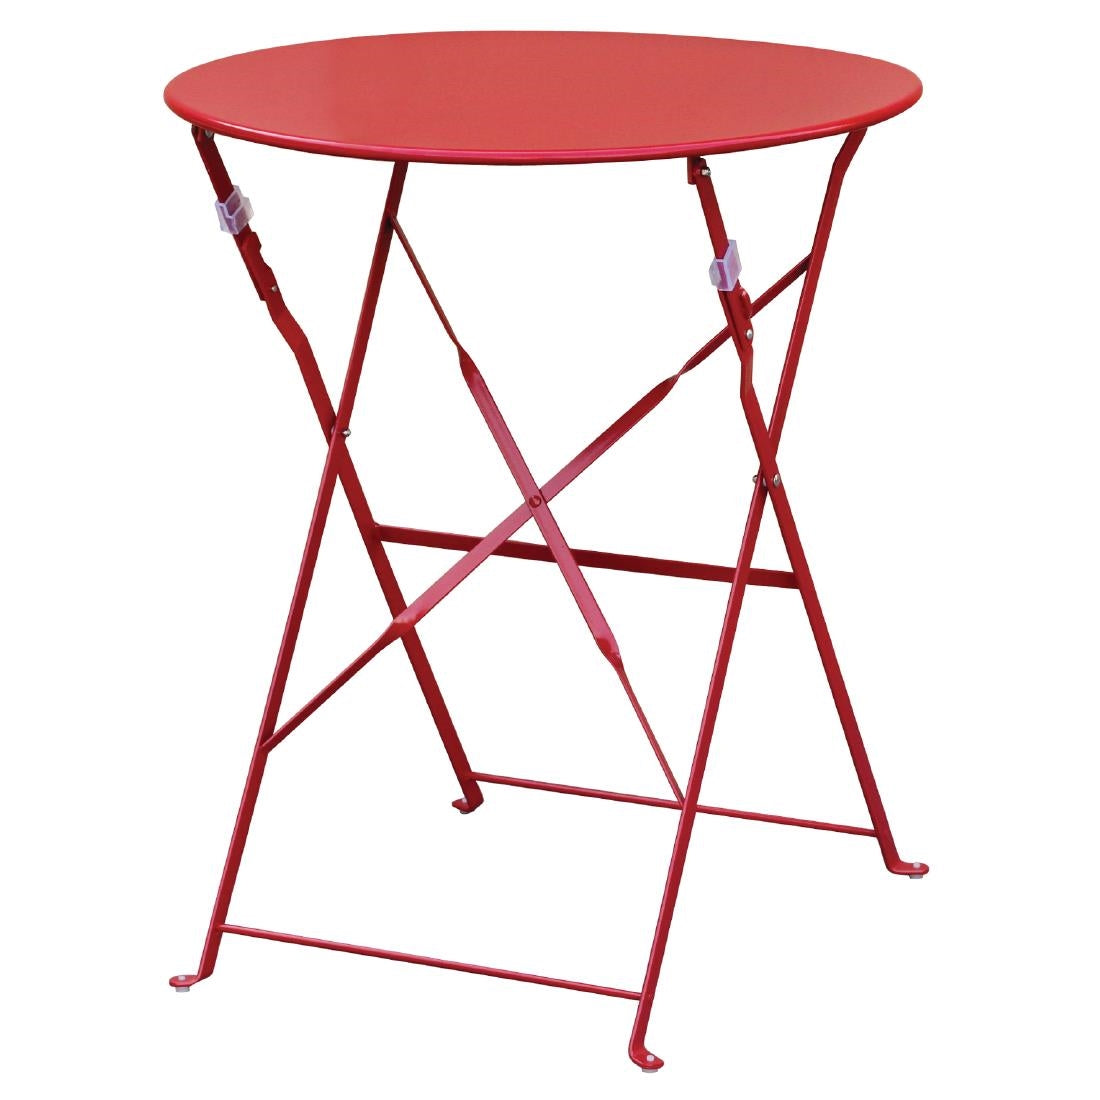 GH560 Bolero Pavement Style Round Steel Table Red 595mm JD Catering Equipment Solutions Ltd